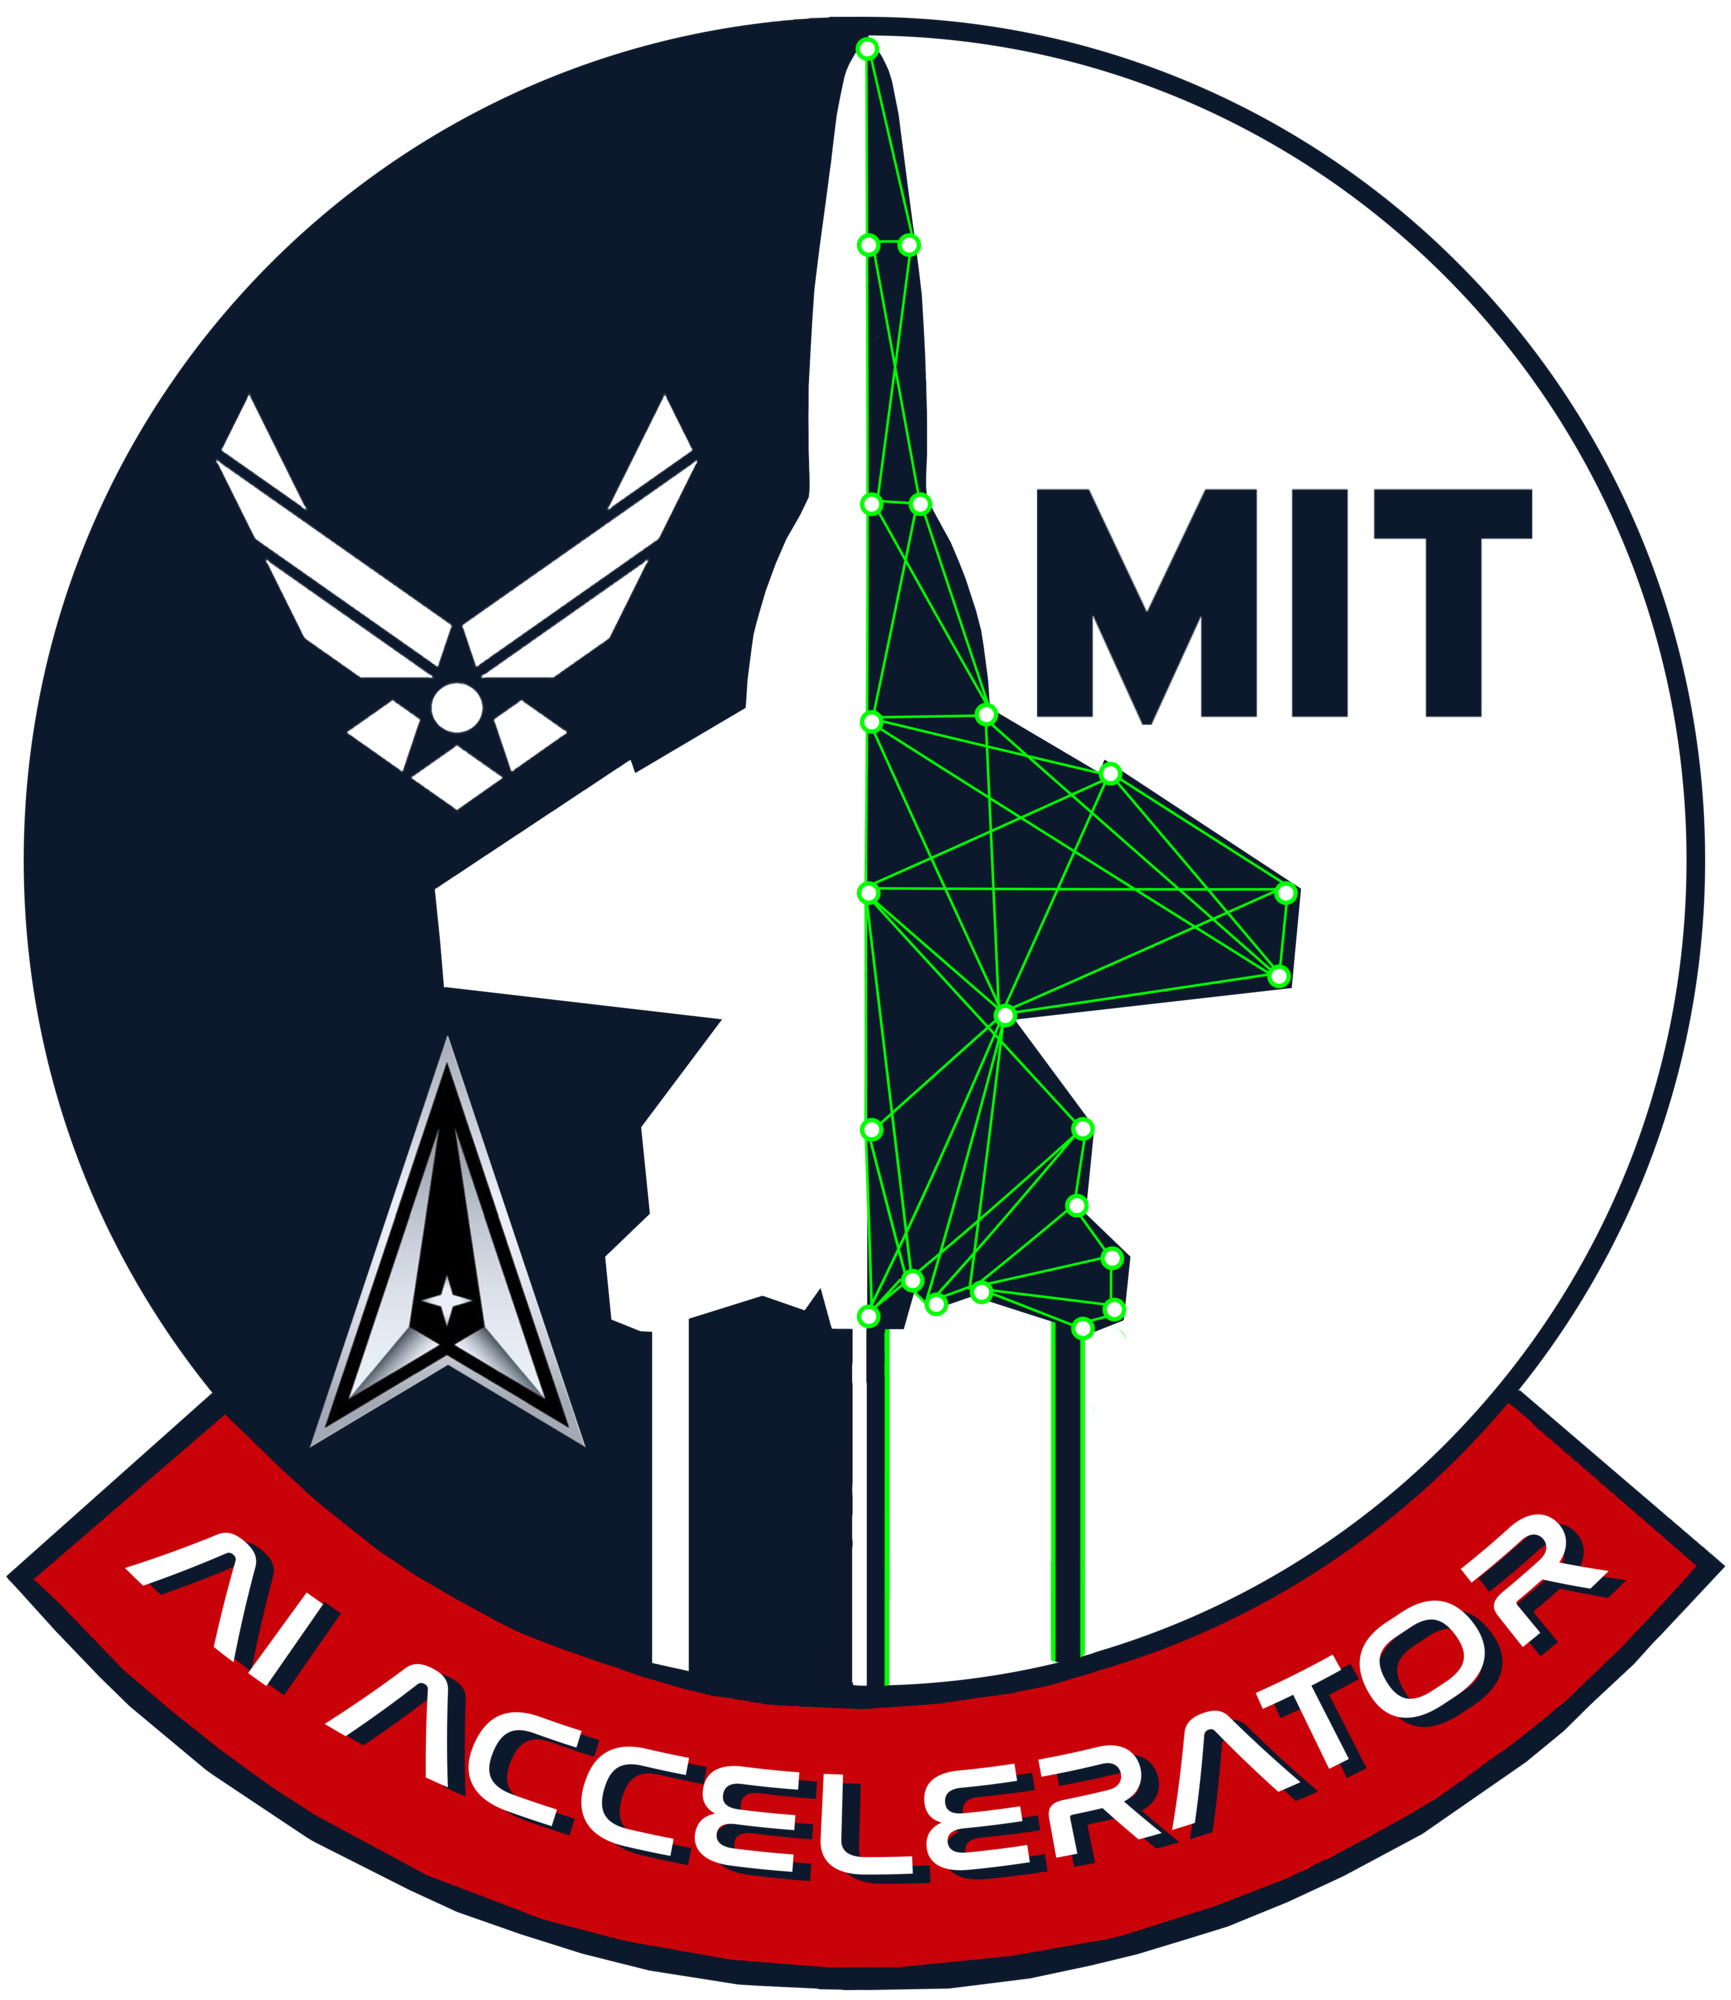 The Department of the Air Force-Massachusetts Institute of Technology Artificial Intelligence Accelerator logo.